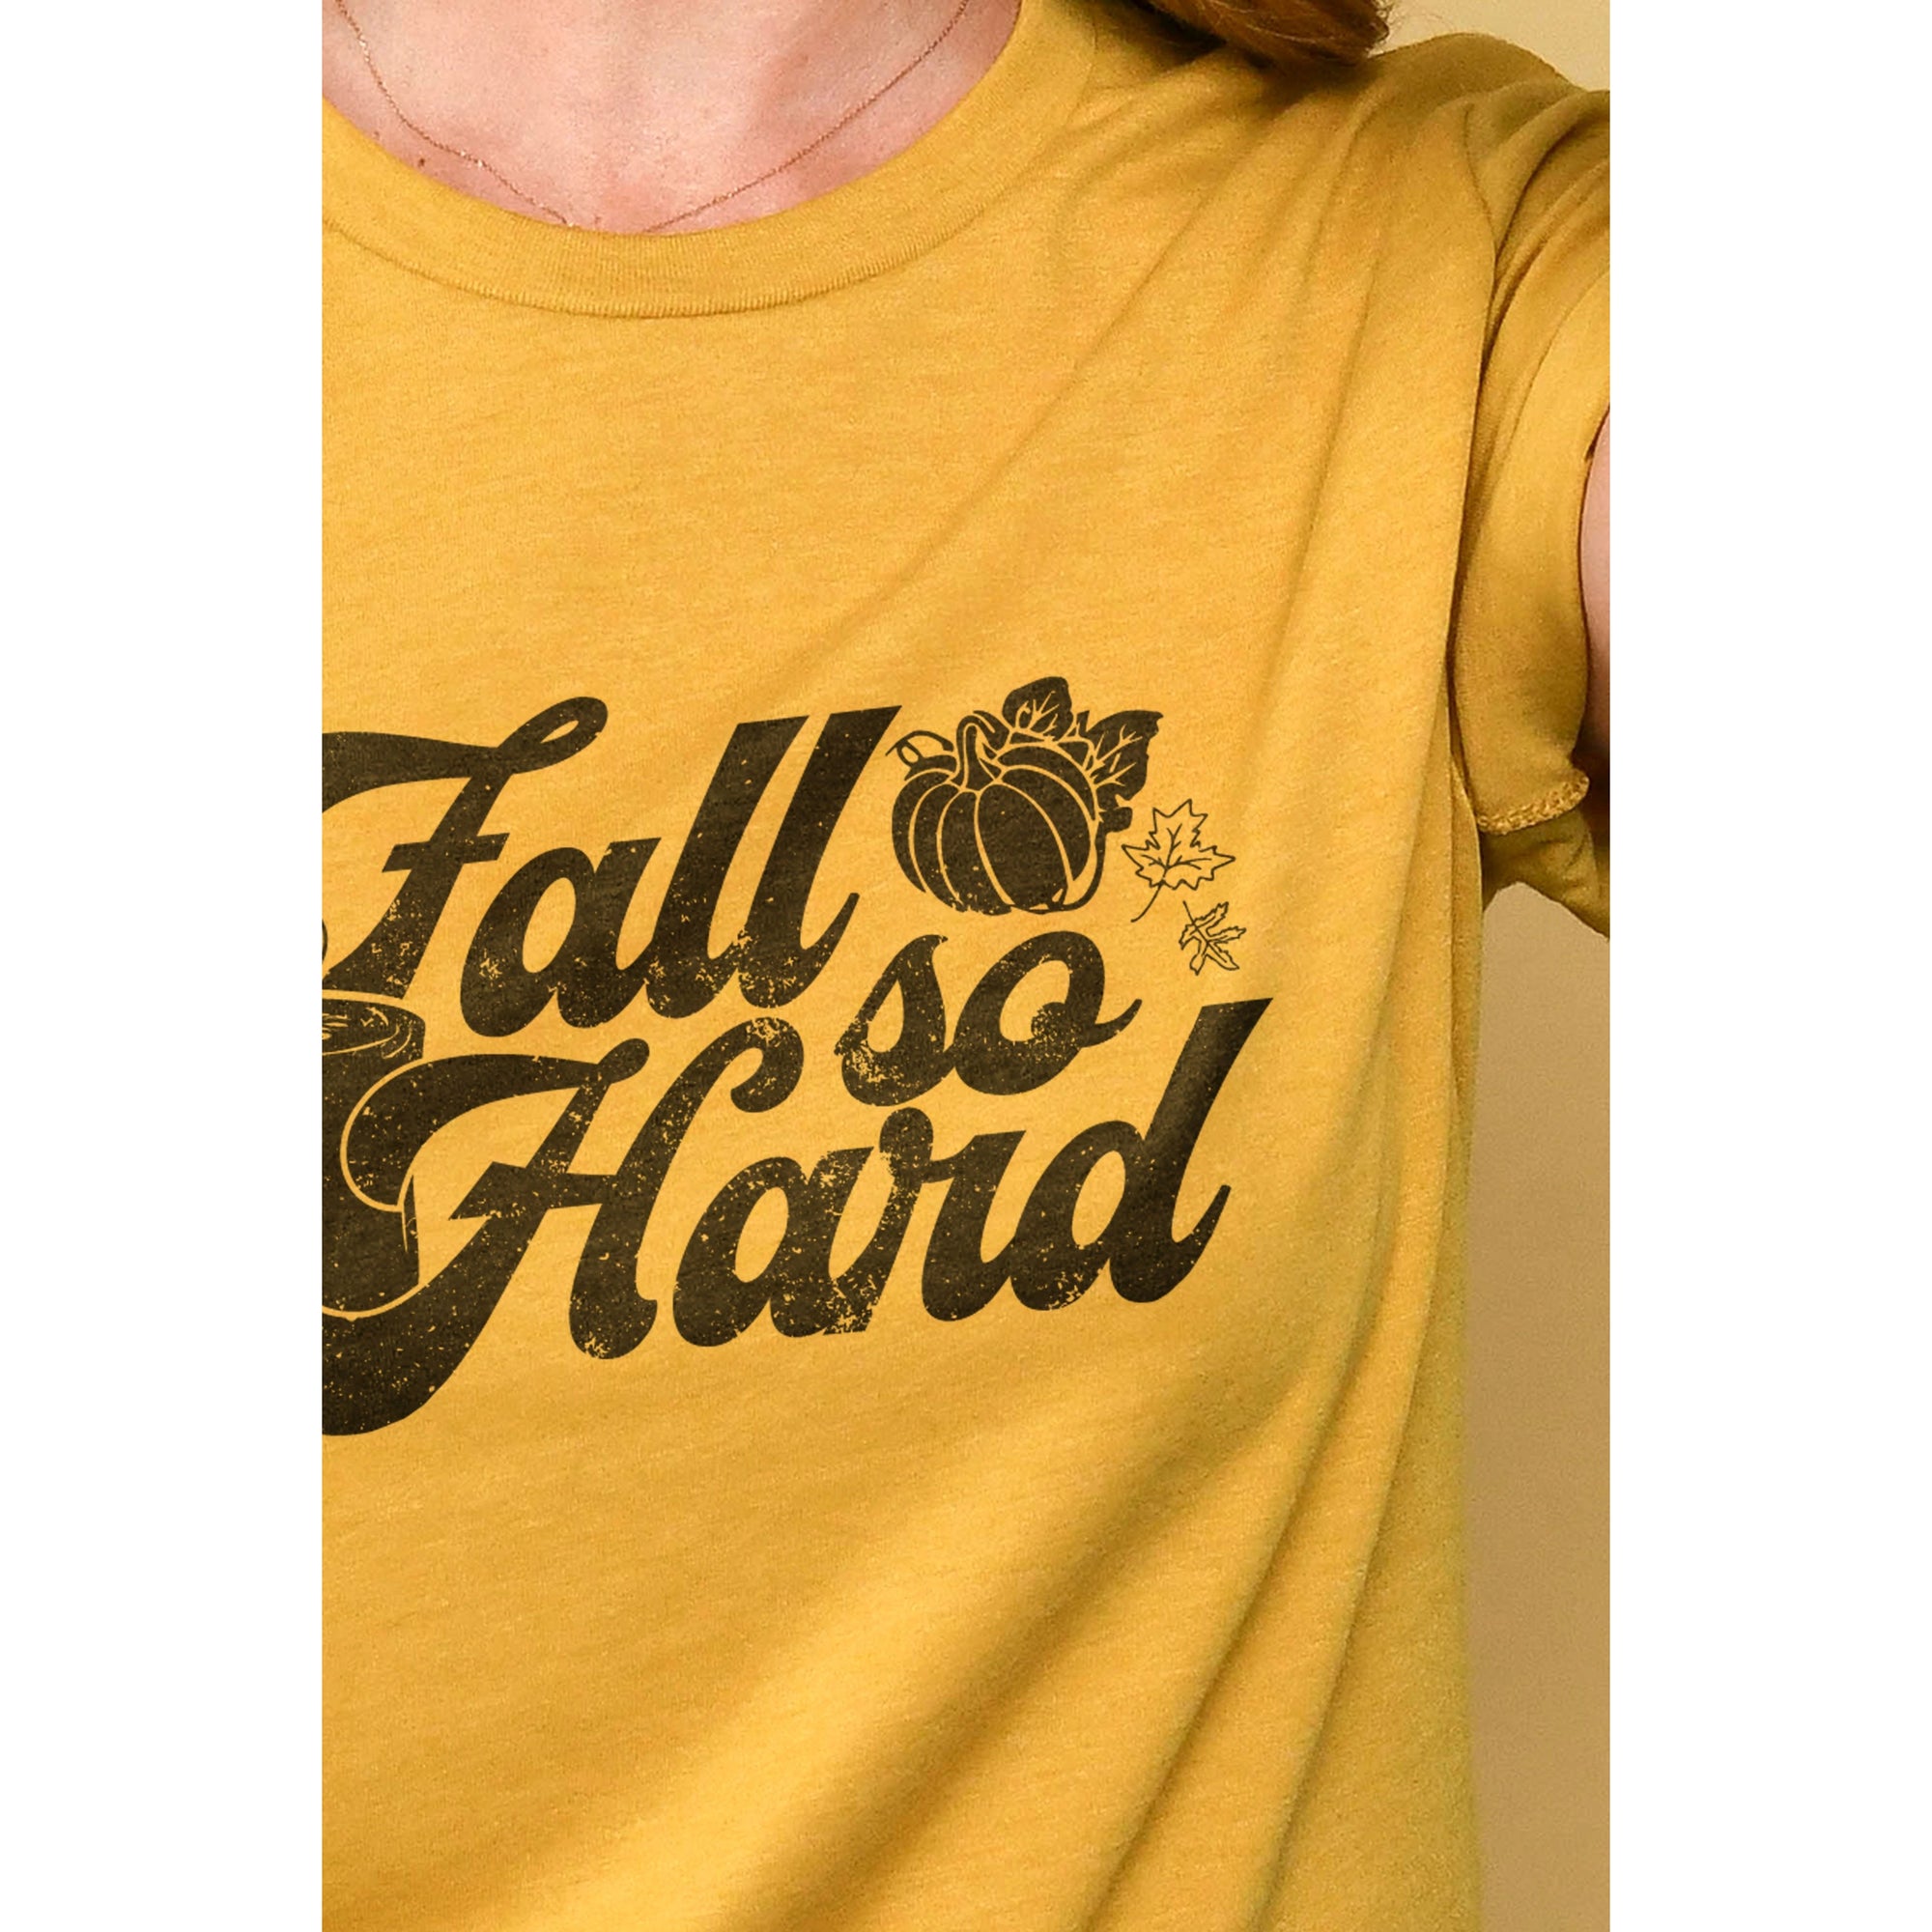 Fall So Hard - thread tank | Stories you can wear.